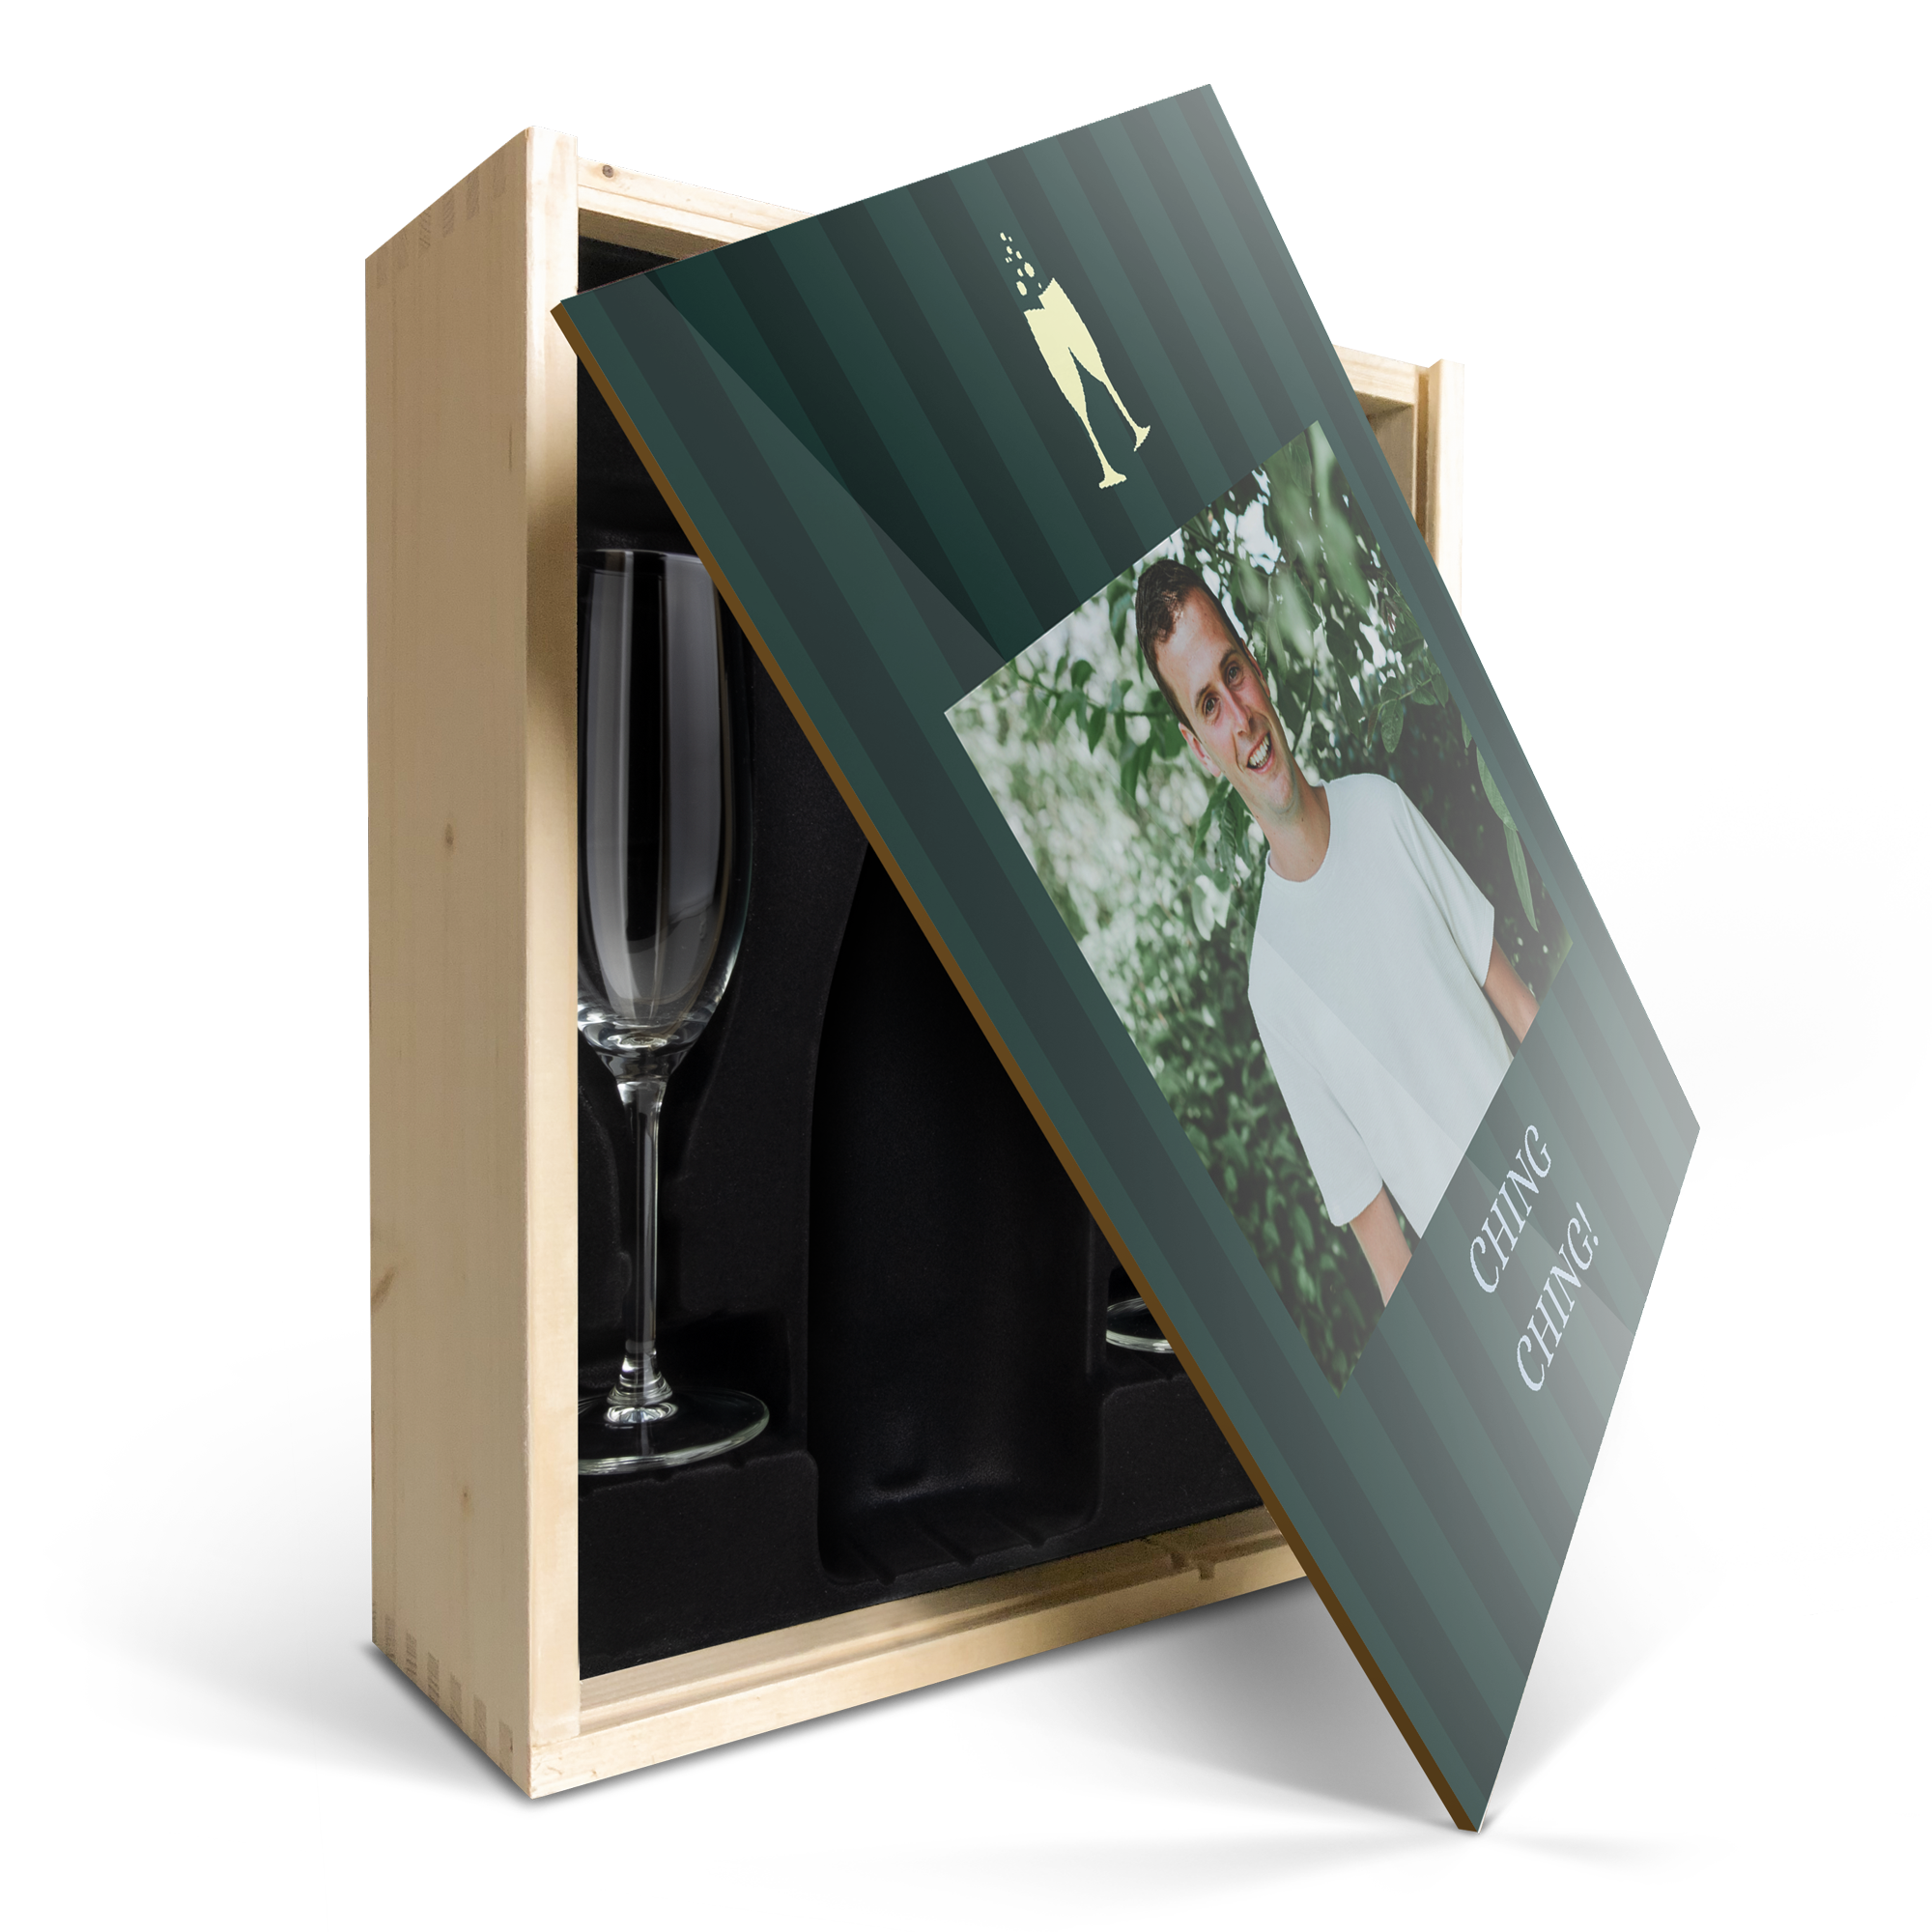 Personalised wooden champagne case - Printed lid - 2 champagne flutes